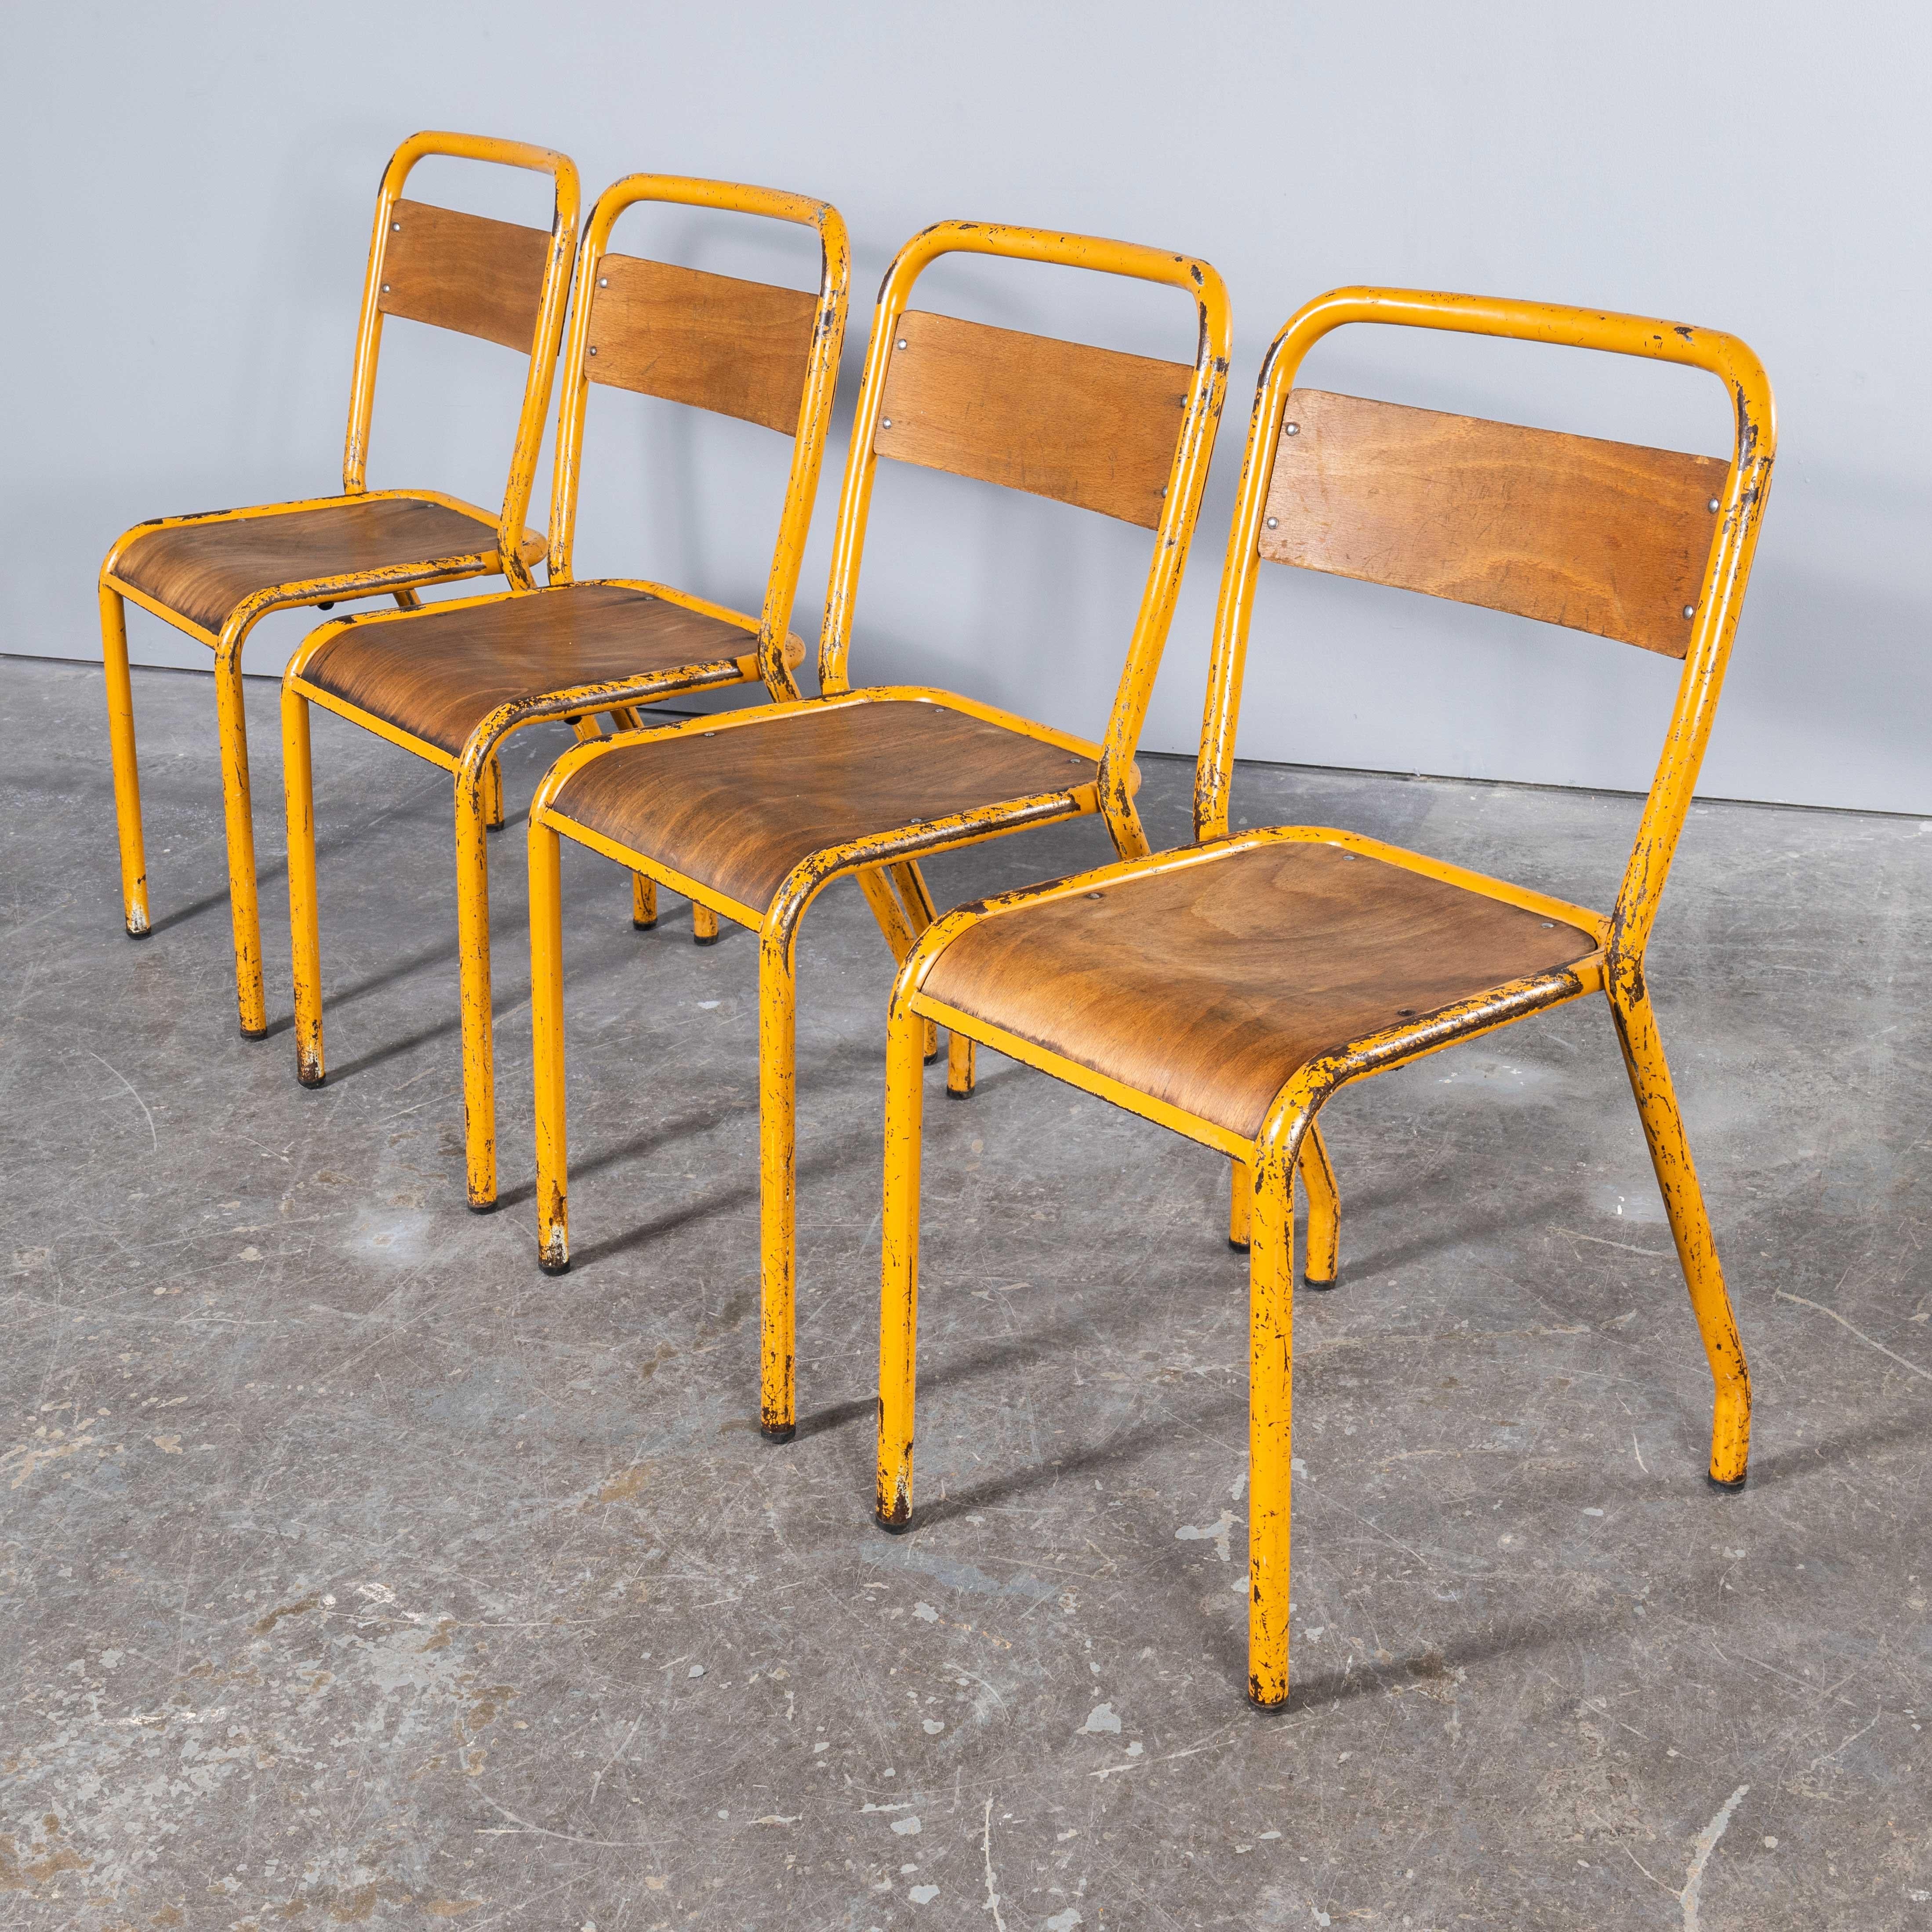 1950's Original Yellow French Tolix Wood Seat Metal Bistro Dining Chair - Large  For Sale 4